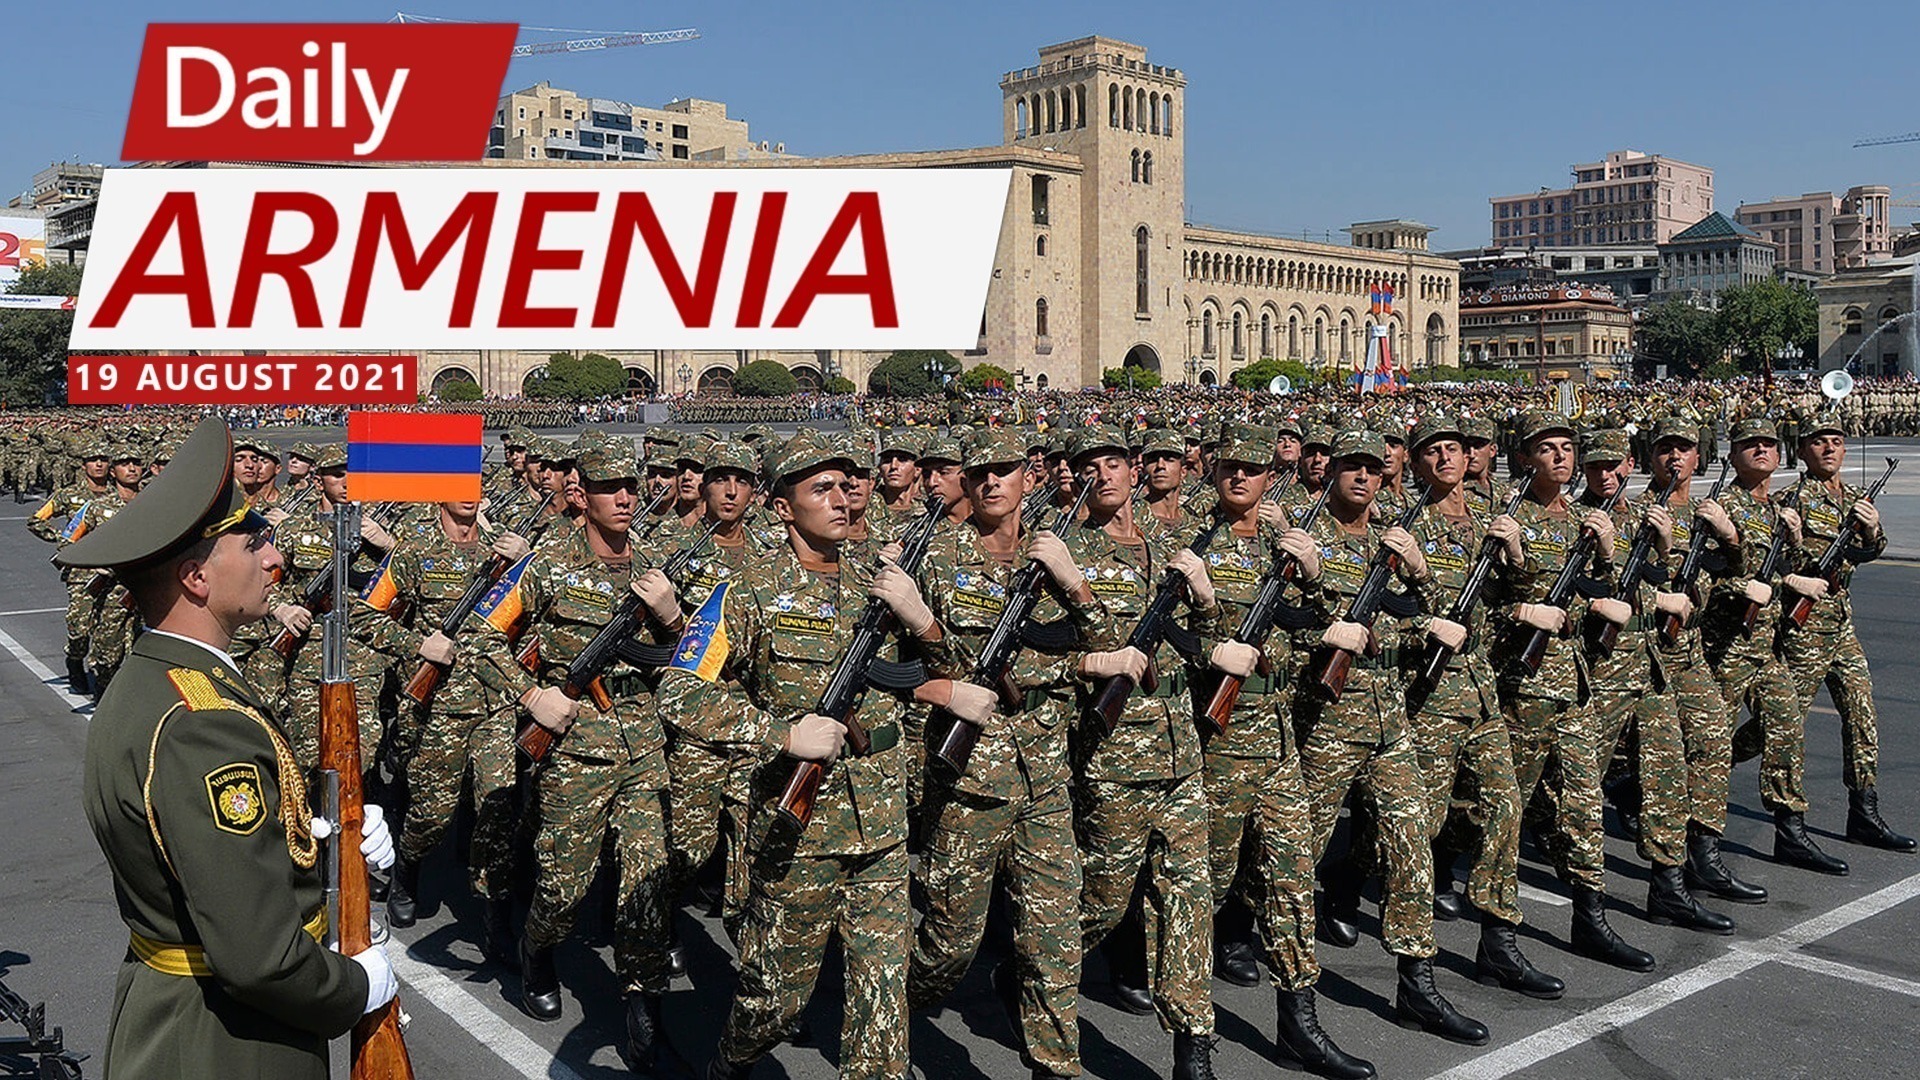 Armenia’s government wants to transition to a professional contract service army by 2026